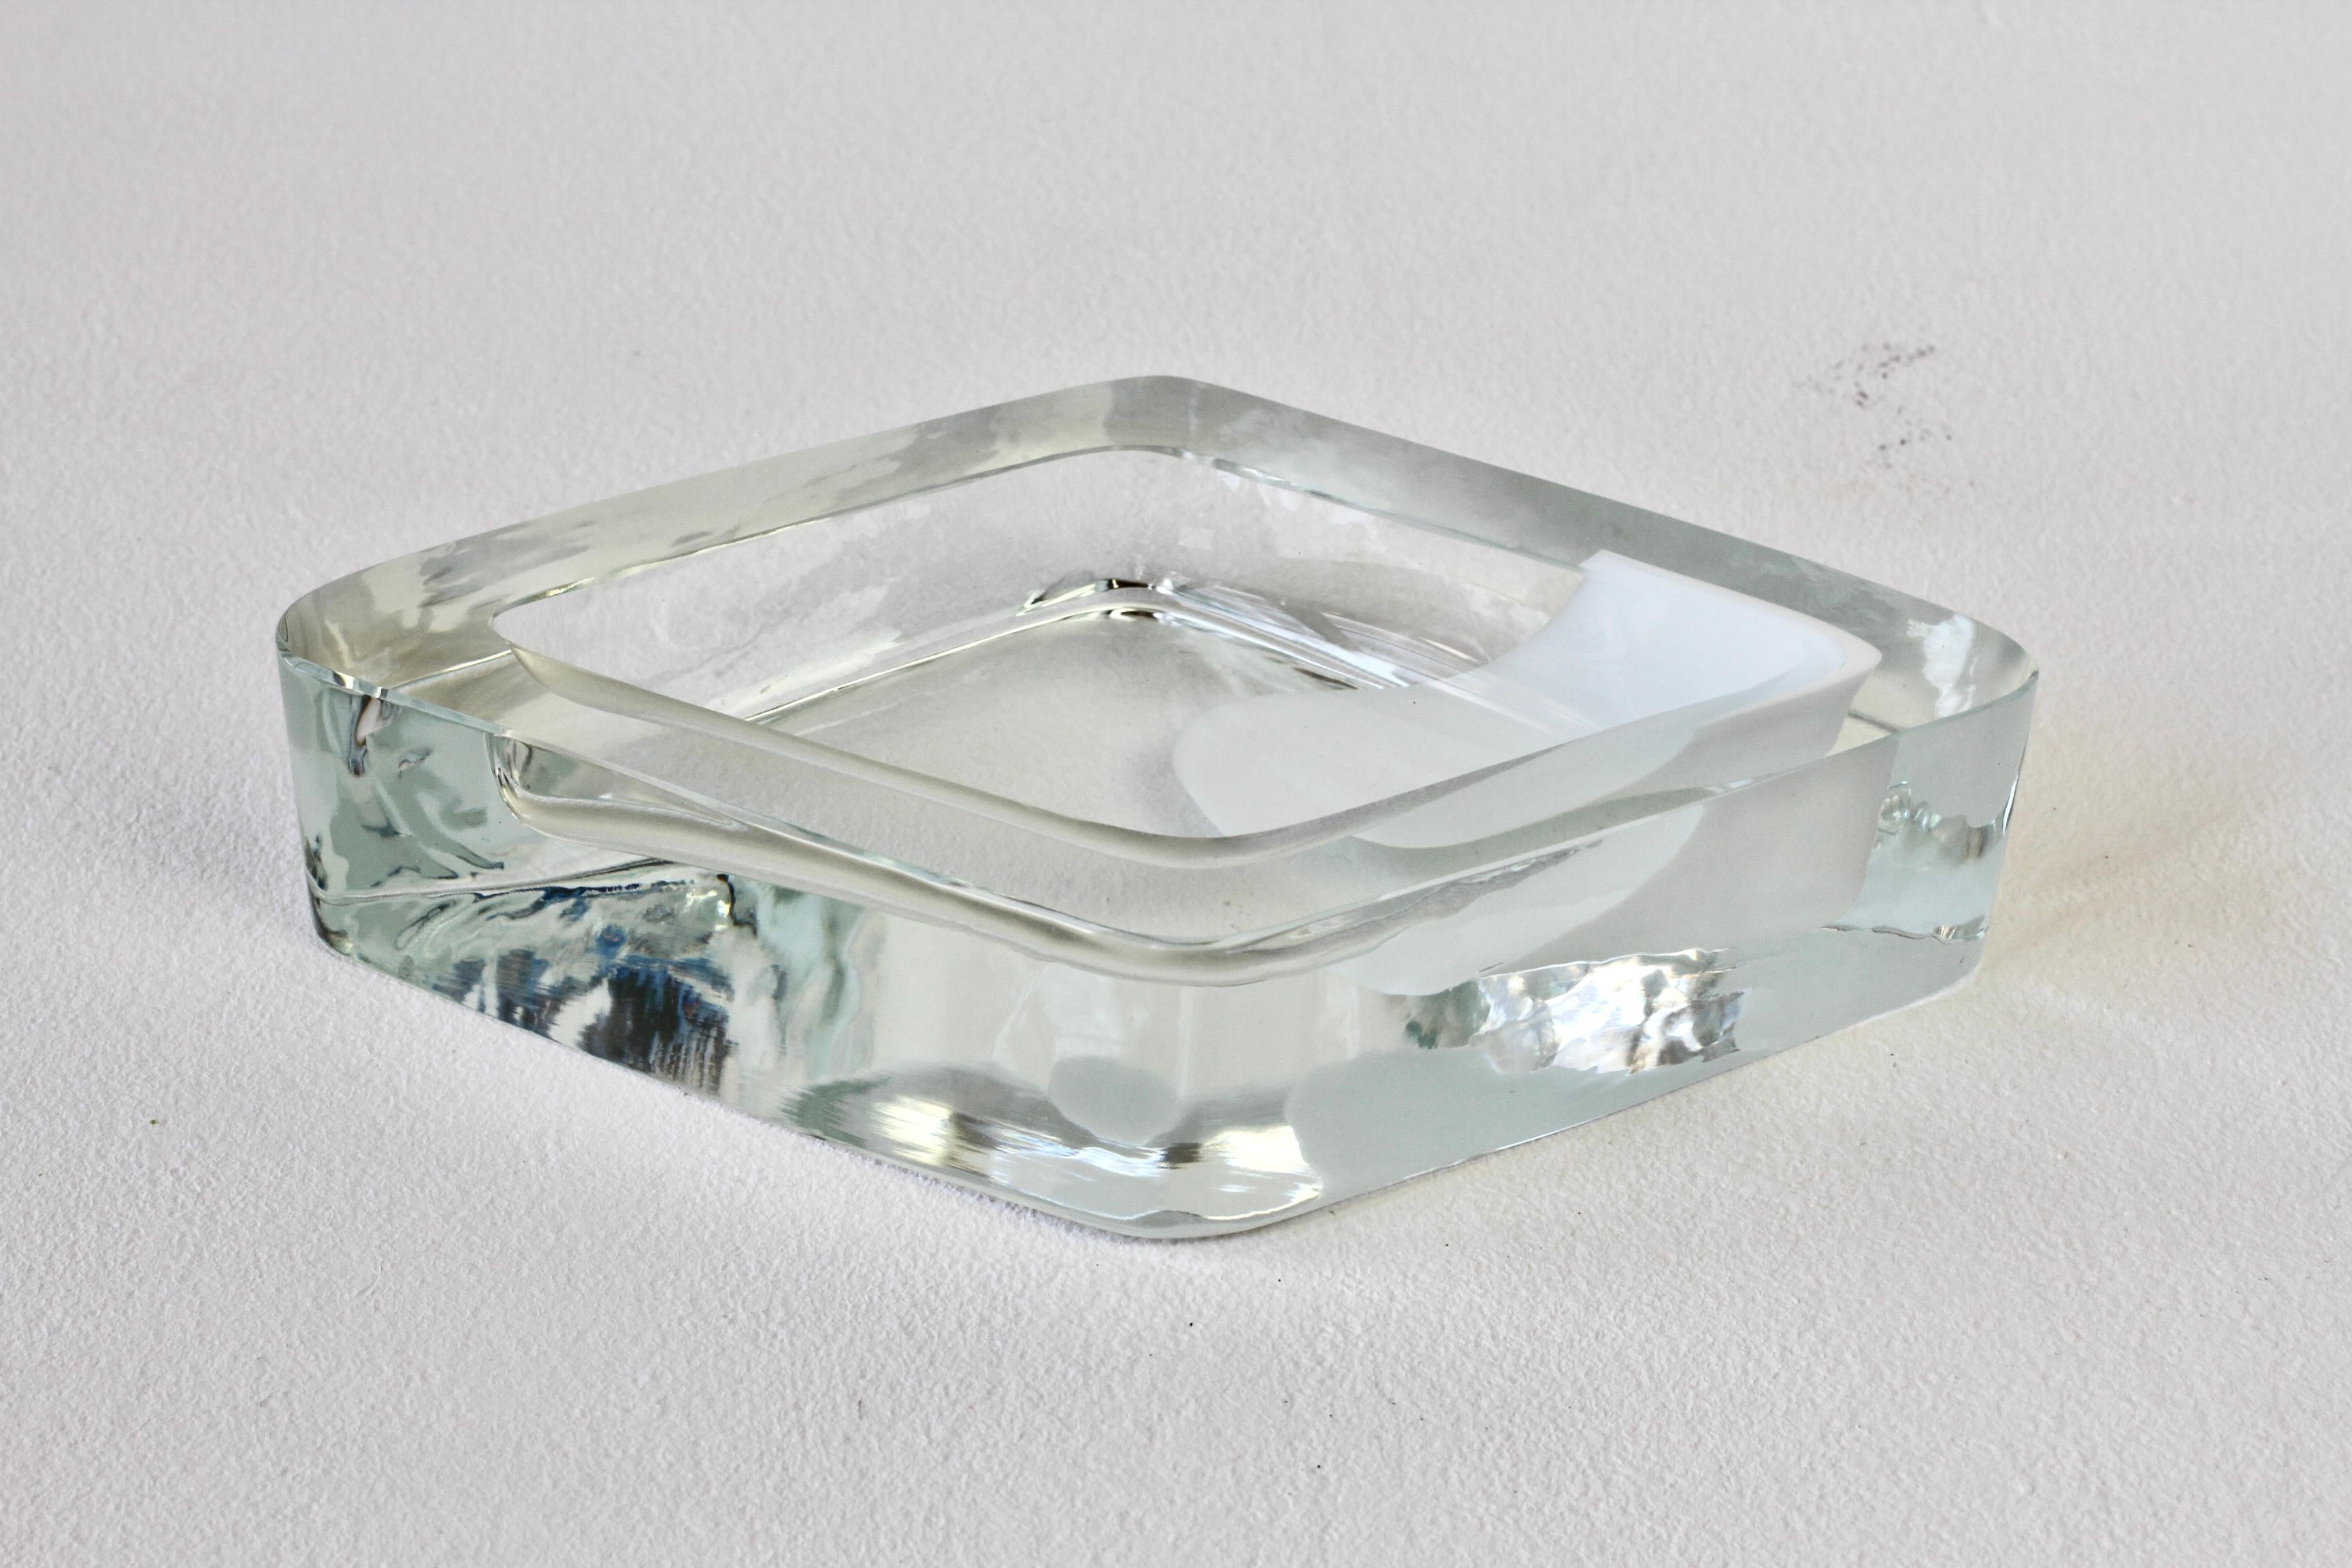 Large Cenedese Italian Rhombus White and Clear Murano Glass Bowl, Dish, Ashtray For Sale 4